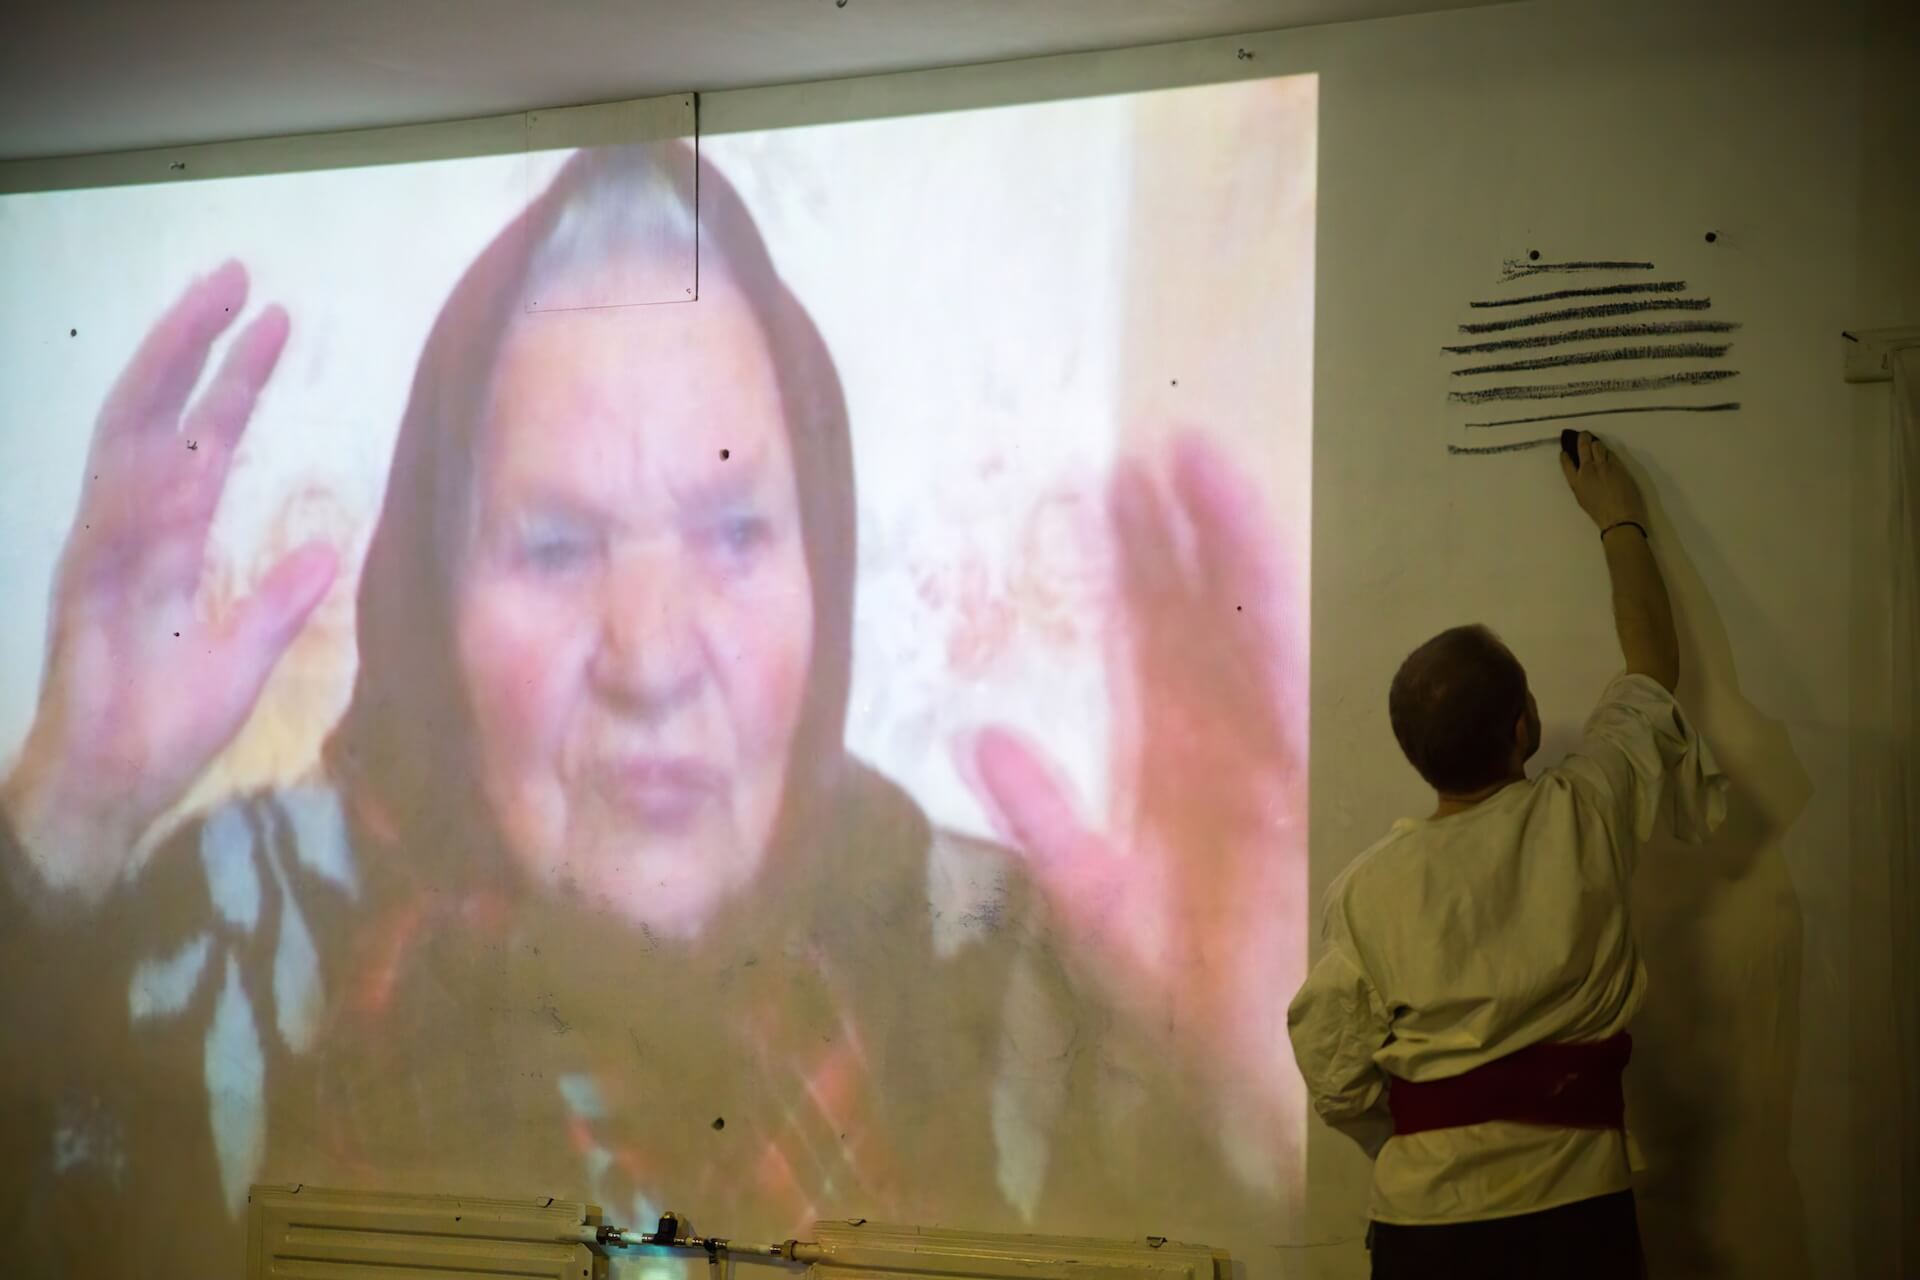 A video of an old lady is projected on the wall. Meanwhile, a performer in a white shirt is drawing black lines with black chalk next to the projected wall.